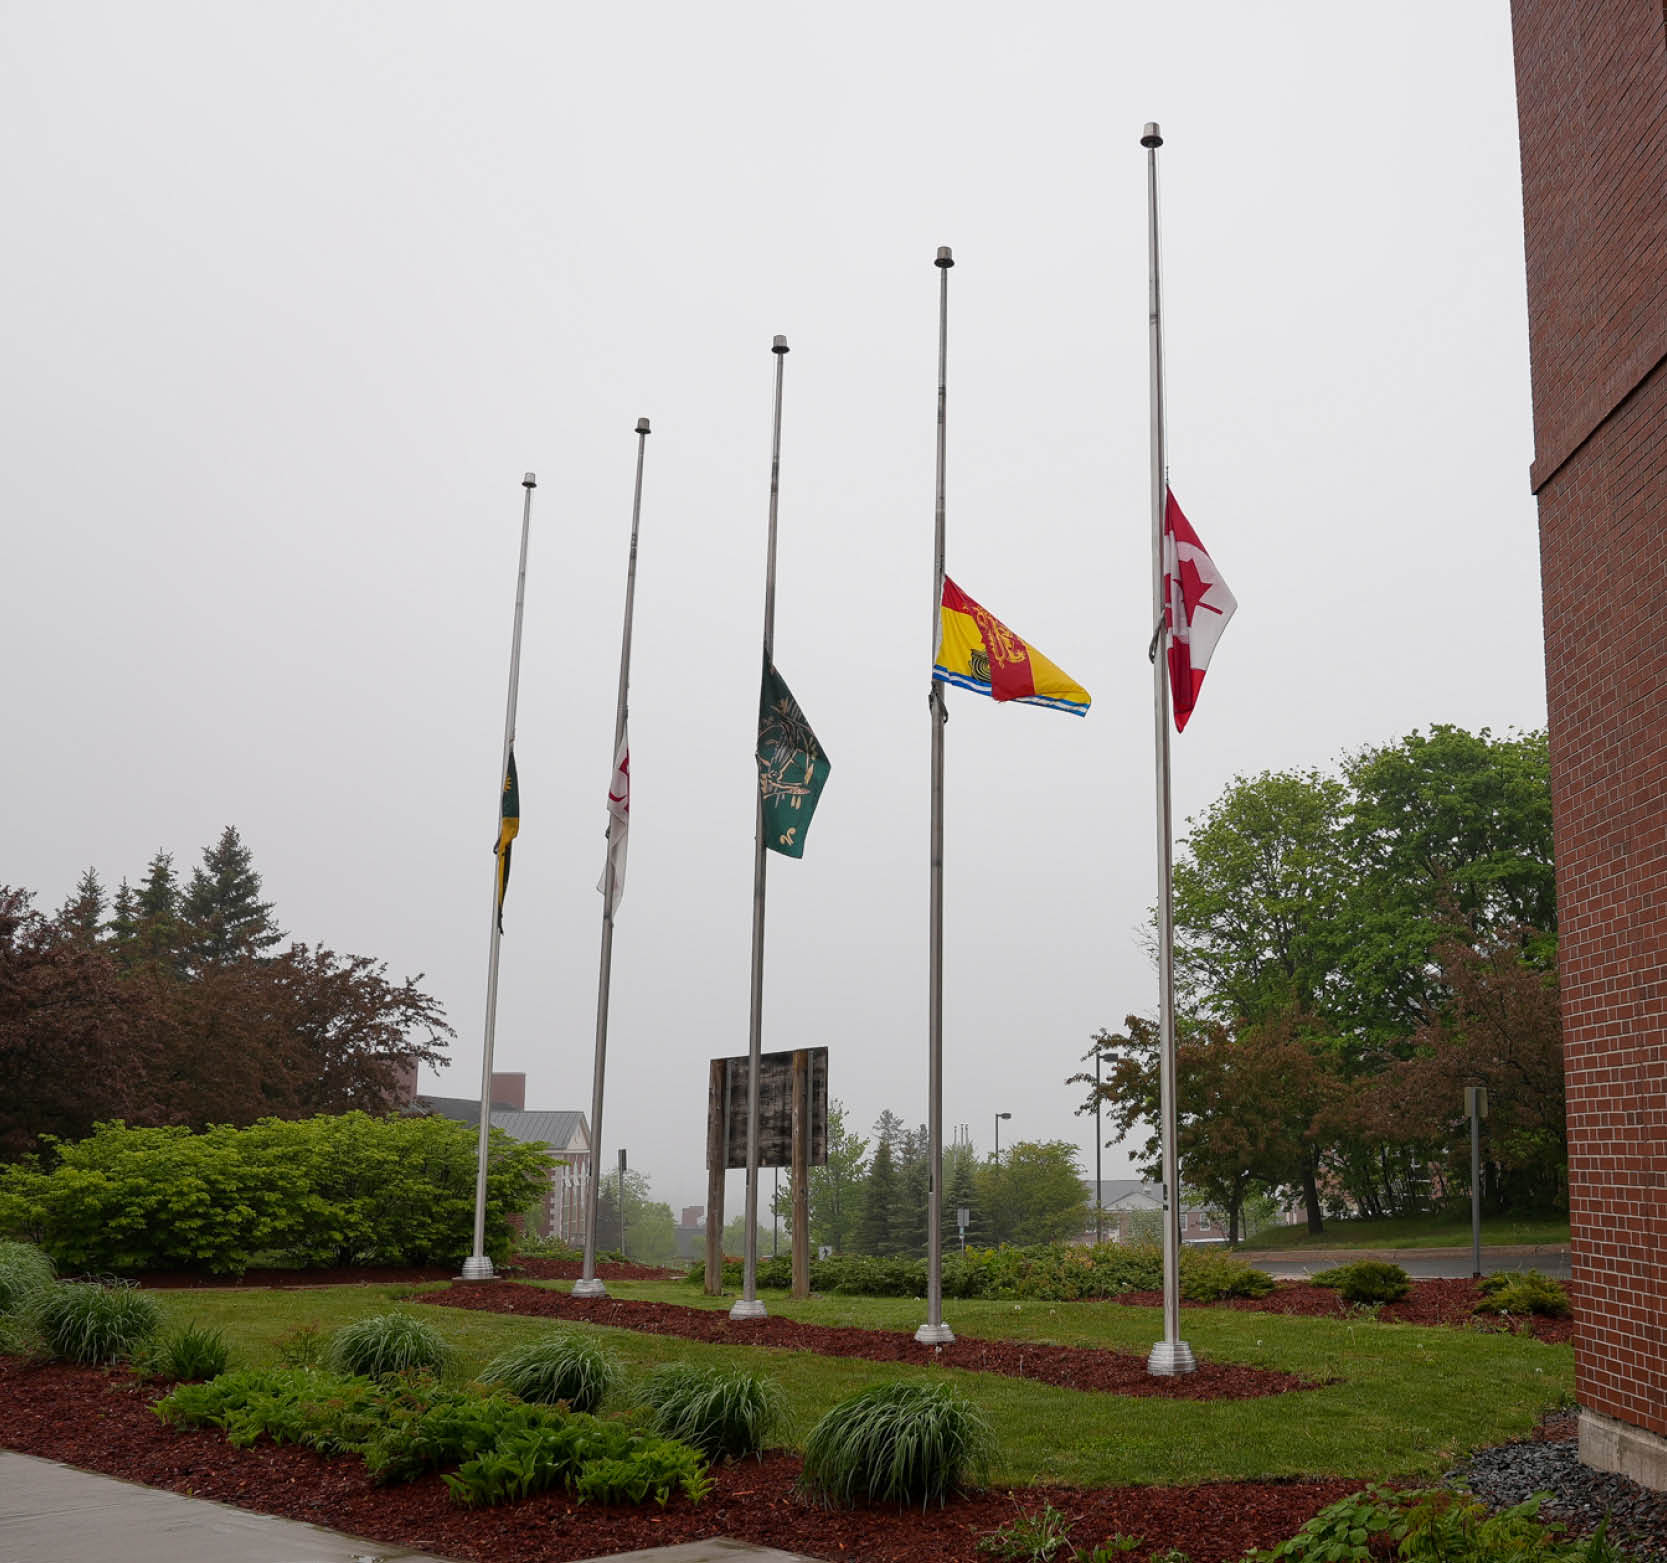 Image for Campus Flags Lowered to Commemorate Discovery of Children’s Bodies at Former Residential School  

